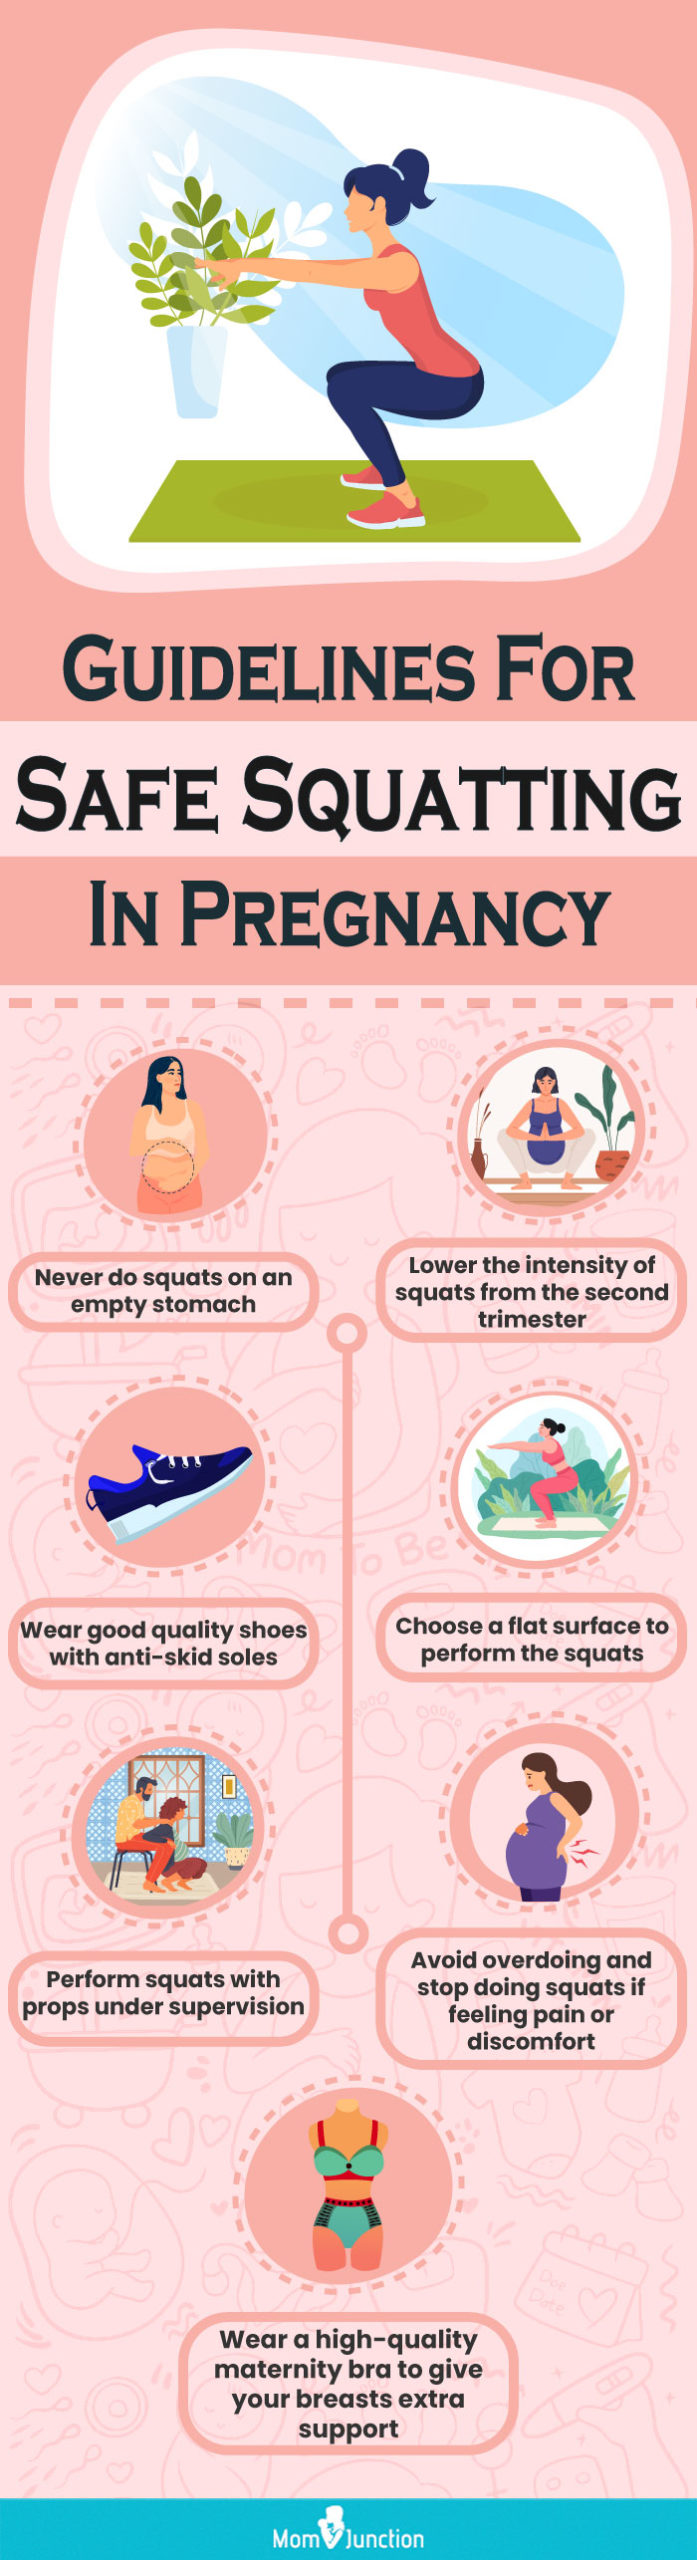 guidelines for safe squatting in pregnancy (infographic)